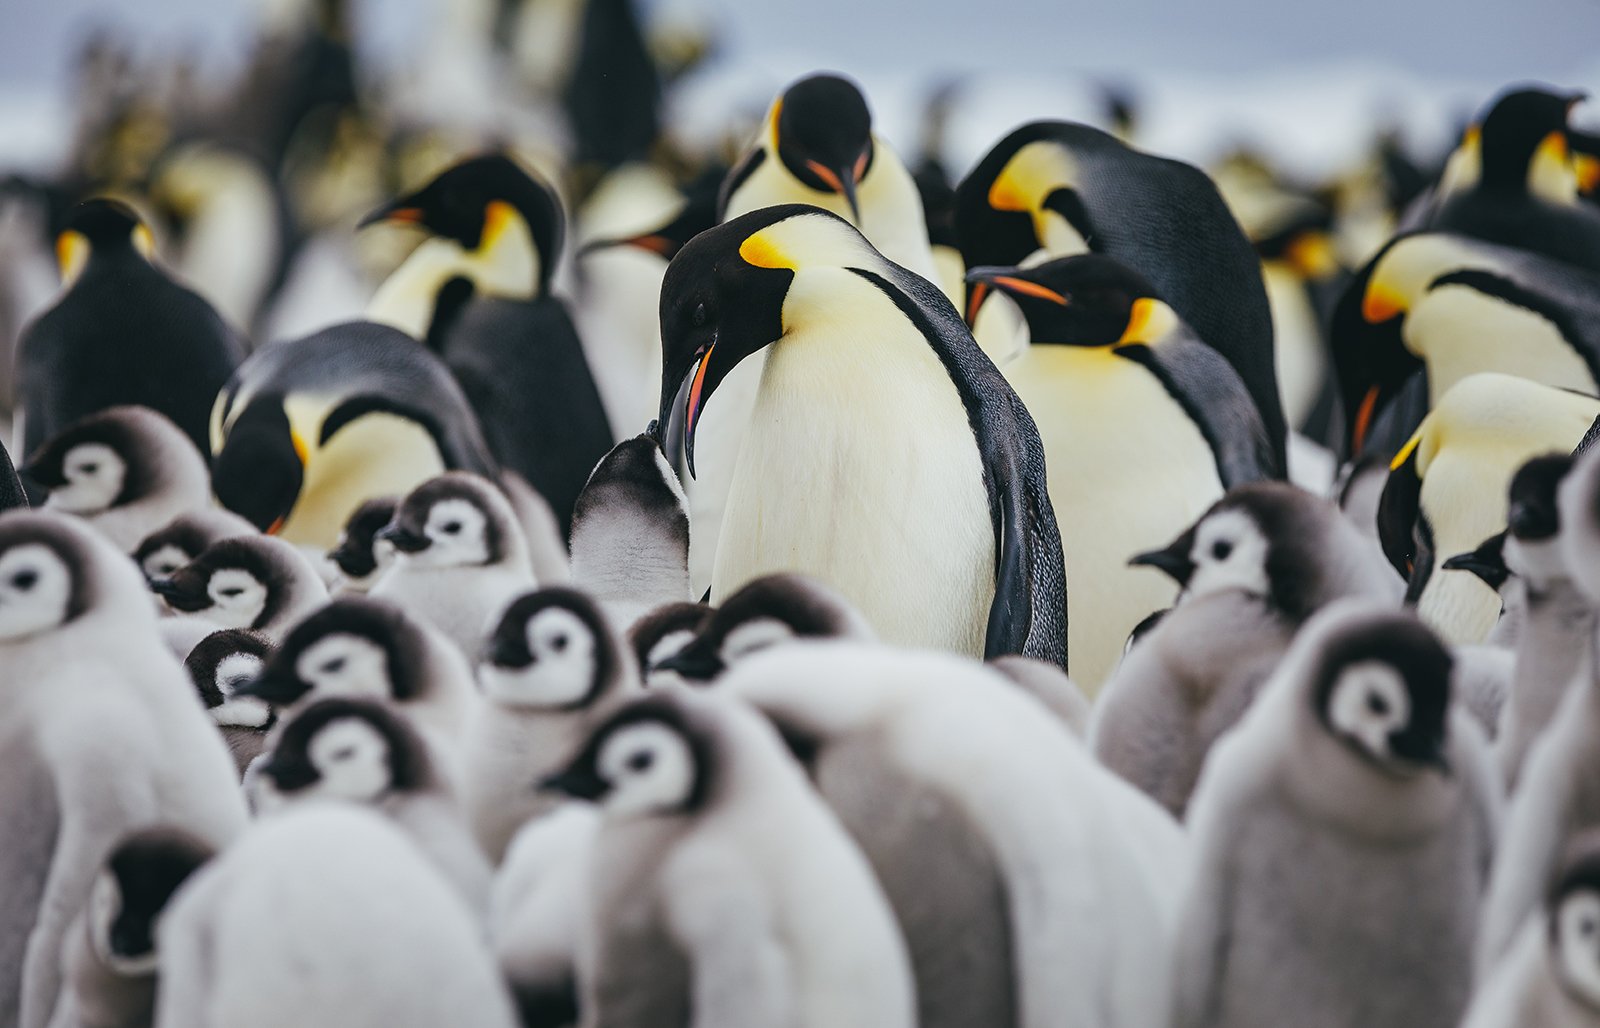 In Search for the Emperor Penguin